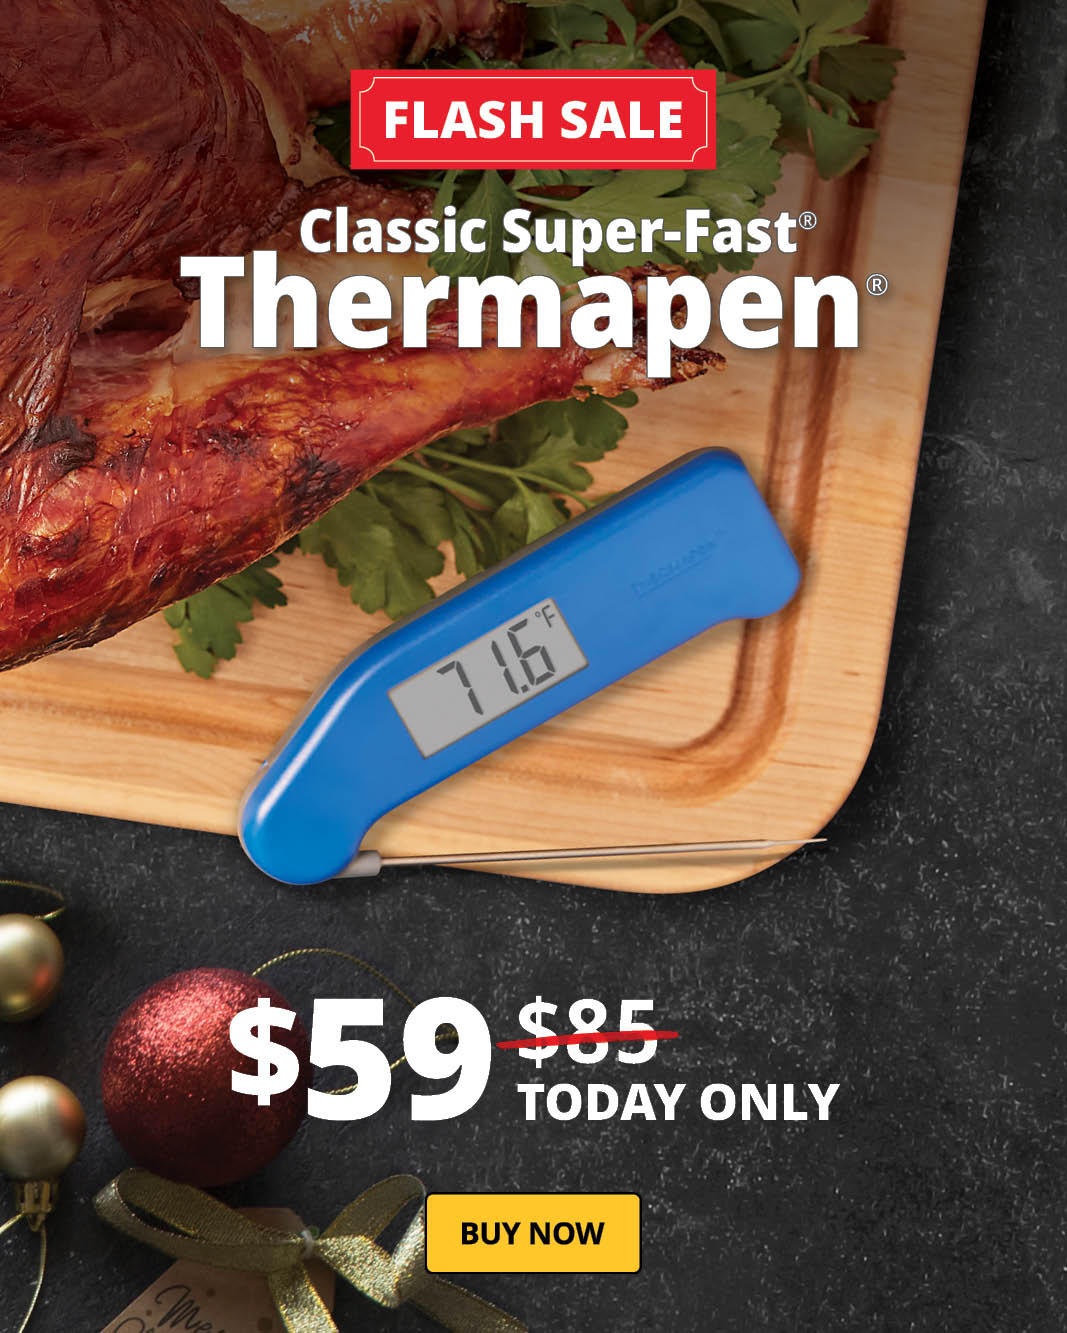 Thermoworks Thermapen IR - The BBQ Allstars